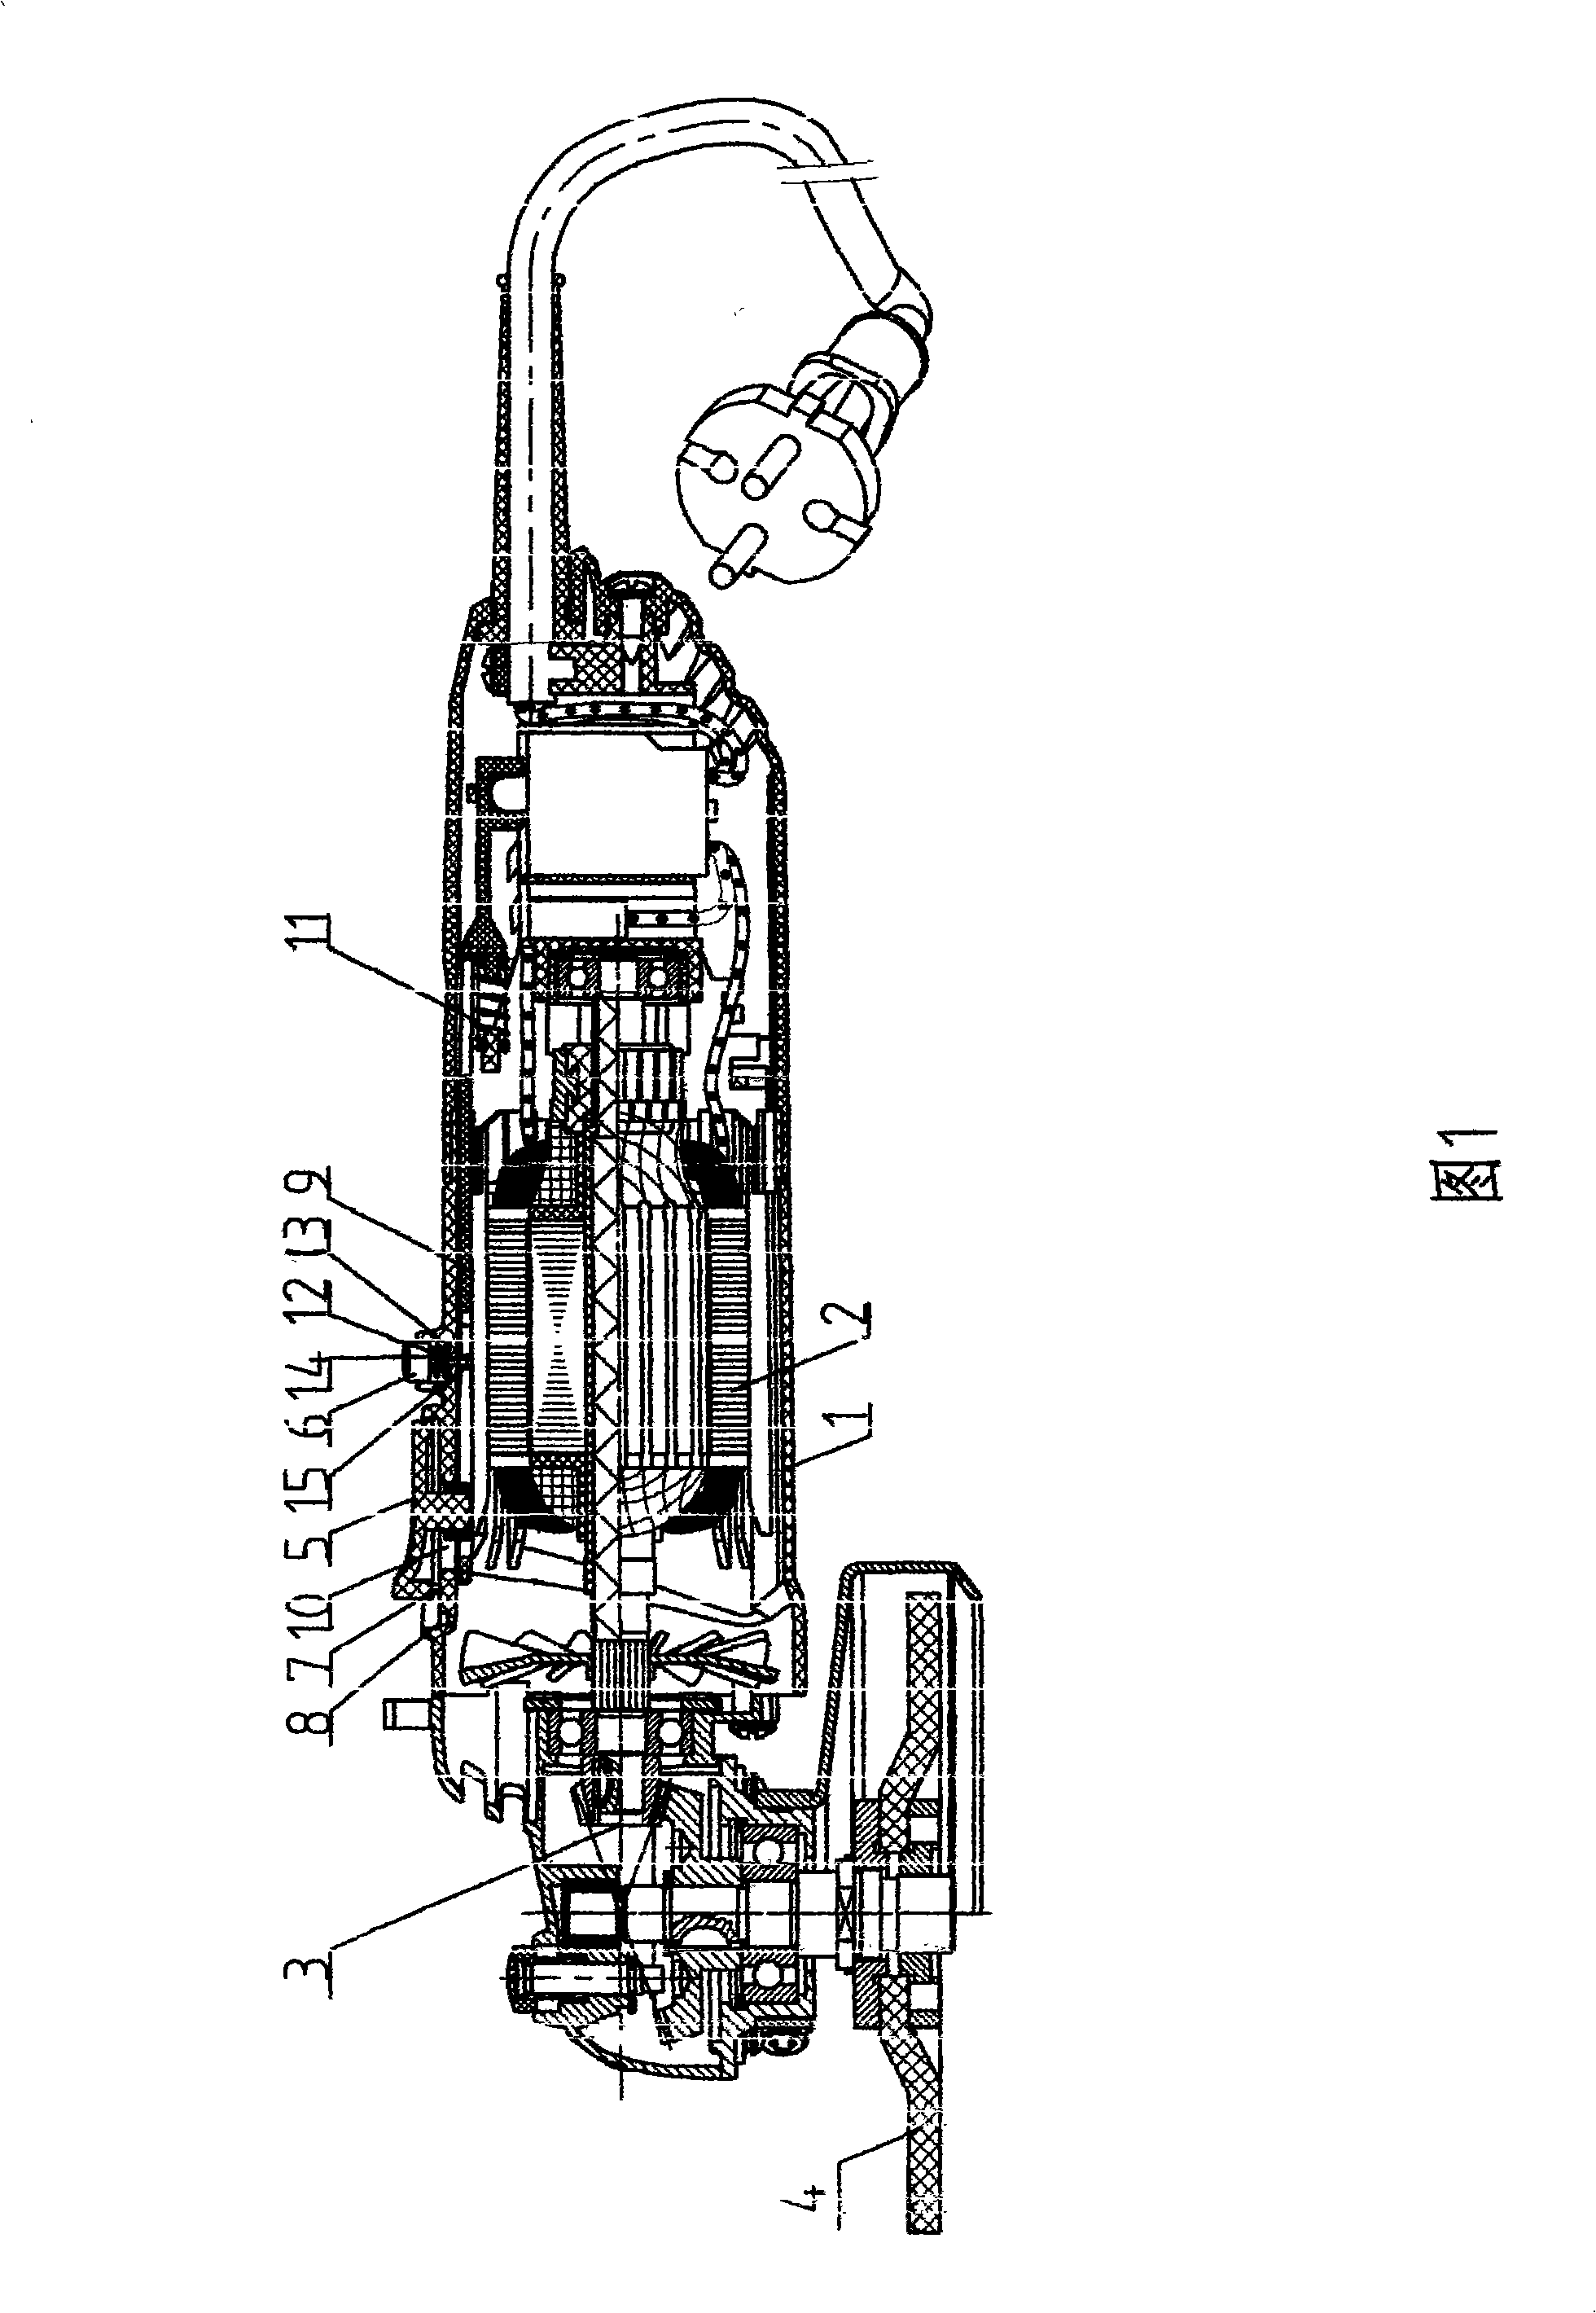 Electric angle grinder with secondary action unlocking mechanism